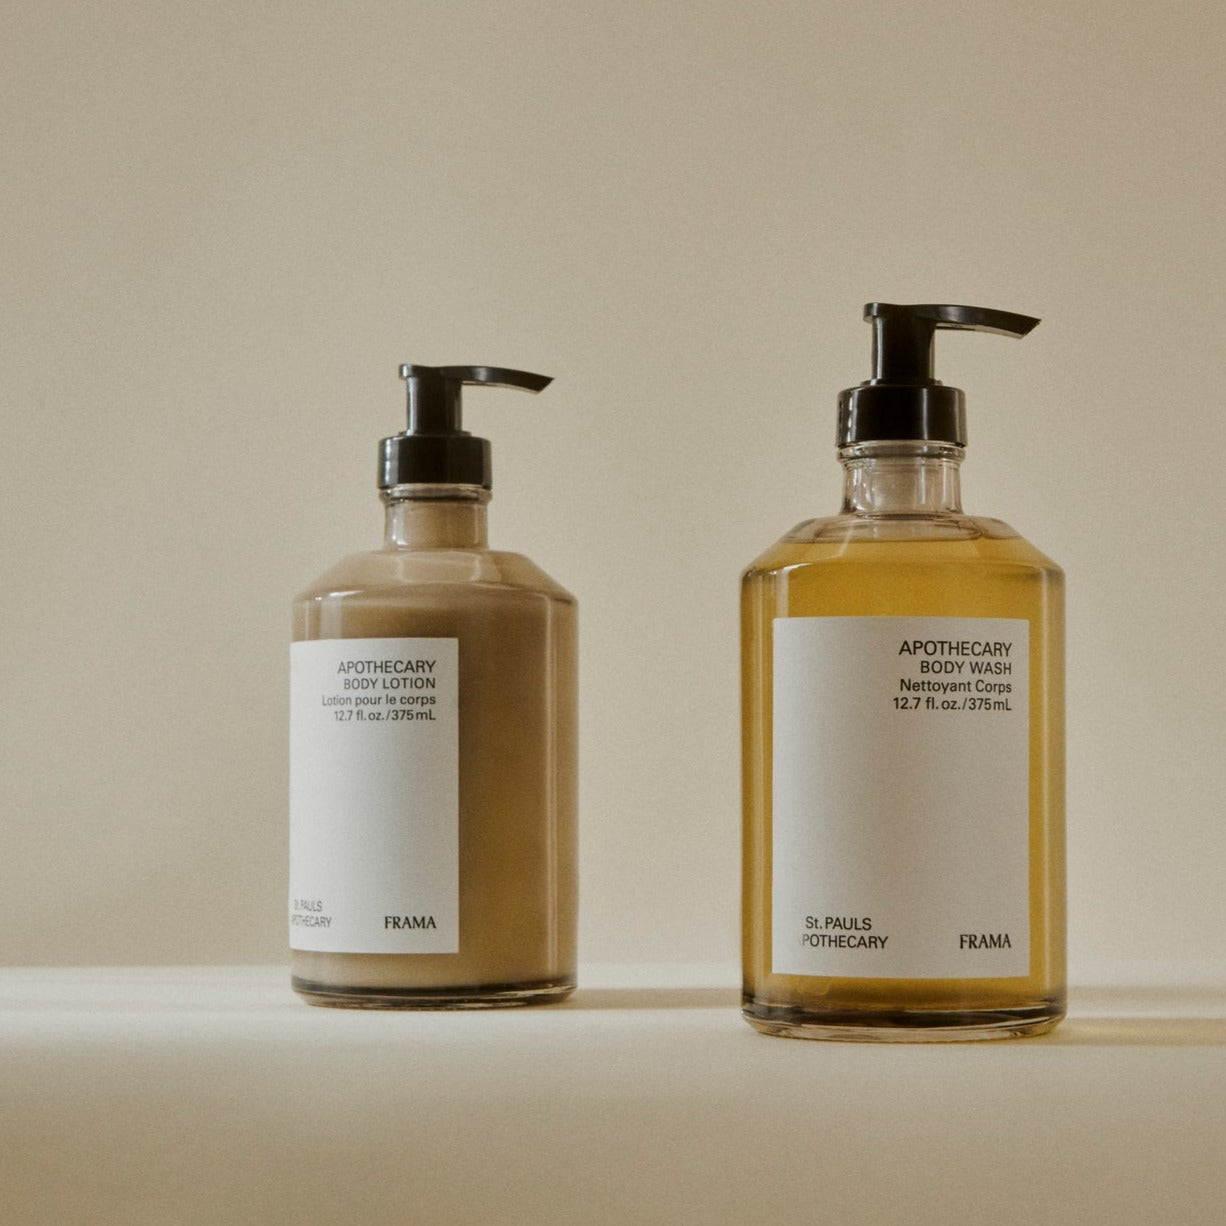 Apothecary Hand Wash